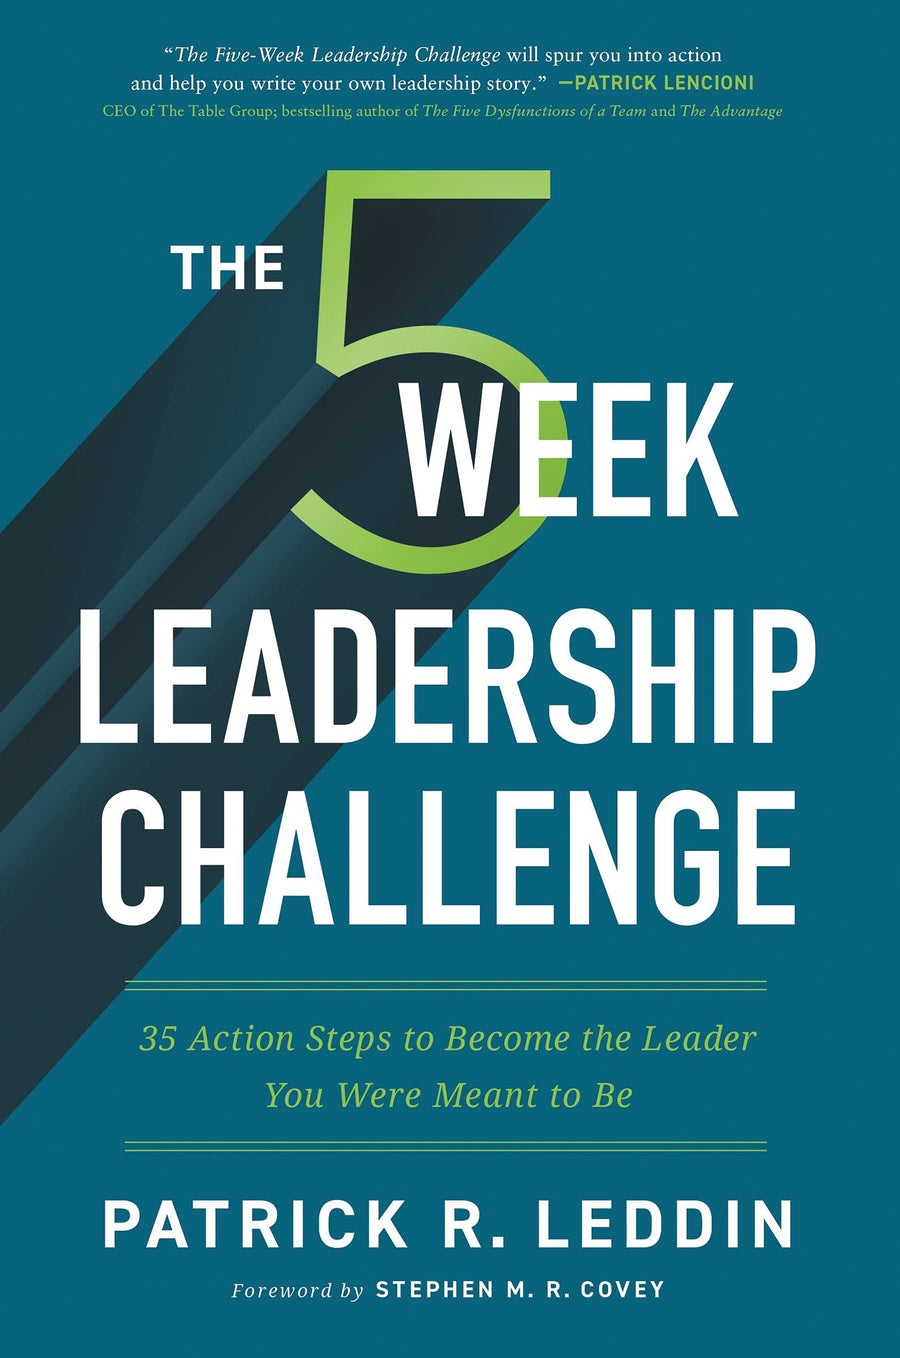 The Five-Week Leadership Challenge: 35 Action Steps to Become the Leader You Were Meant to Be by Patrick R. Leddin